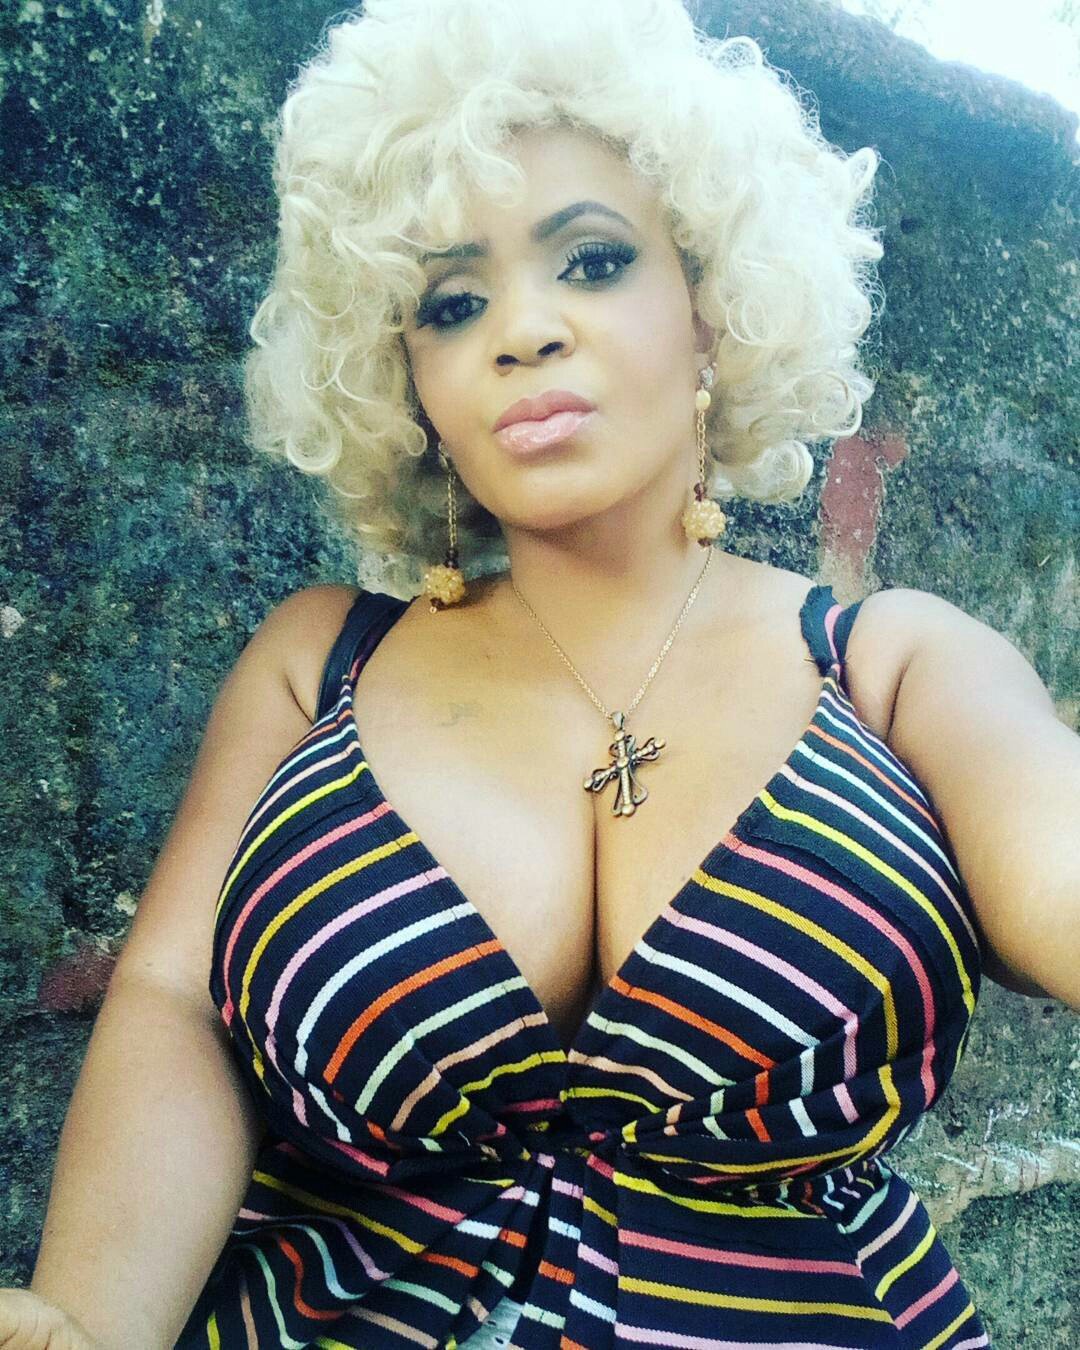 “Wish me Luck”Cossy Orjiakor Solicites for Luck as she Goes in for Surgery